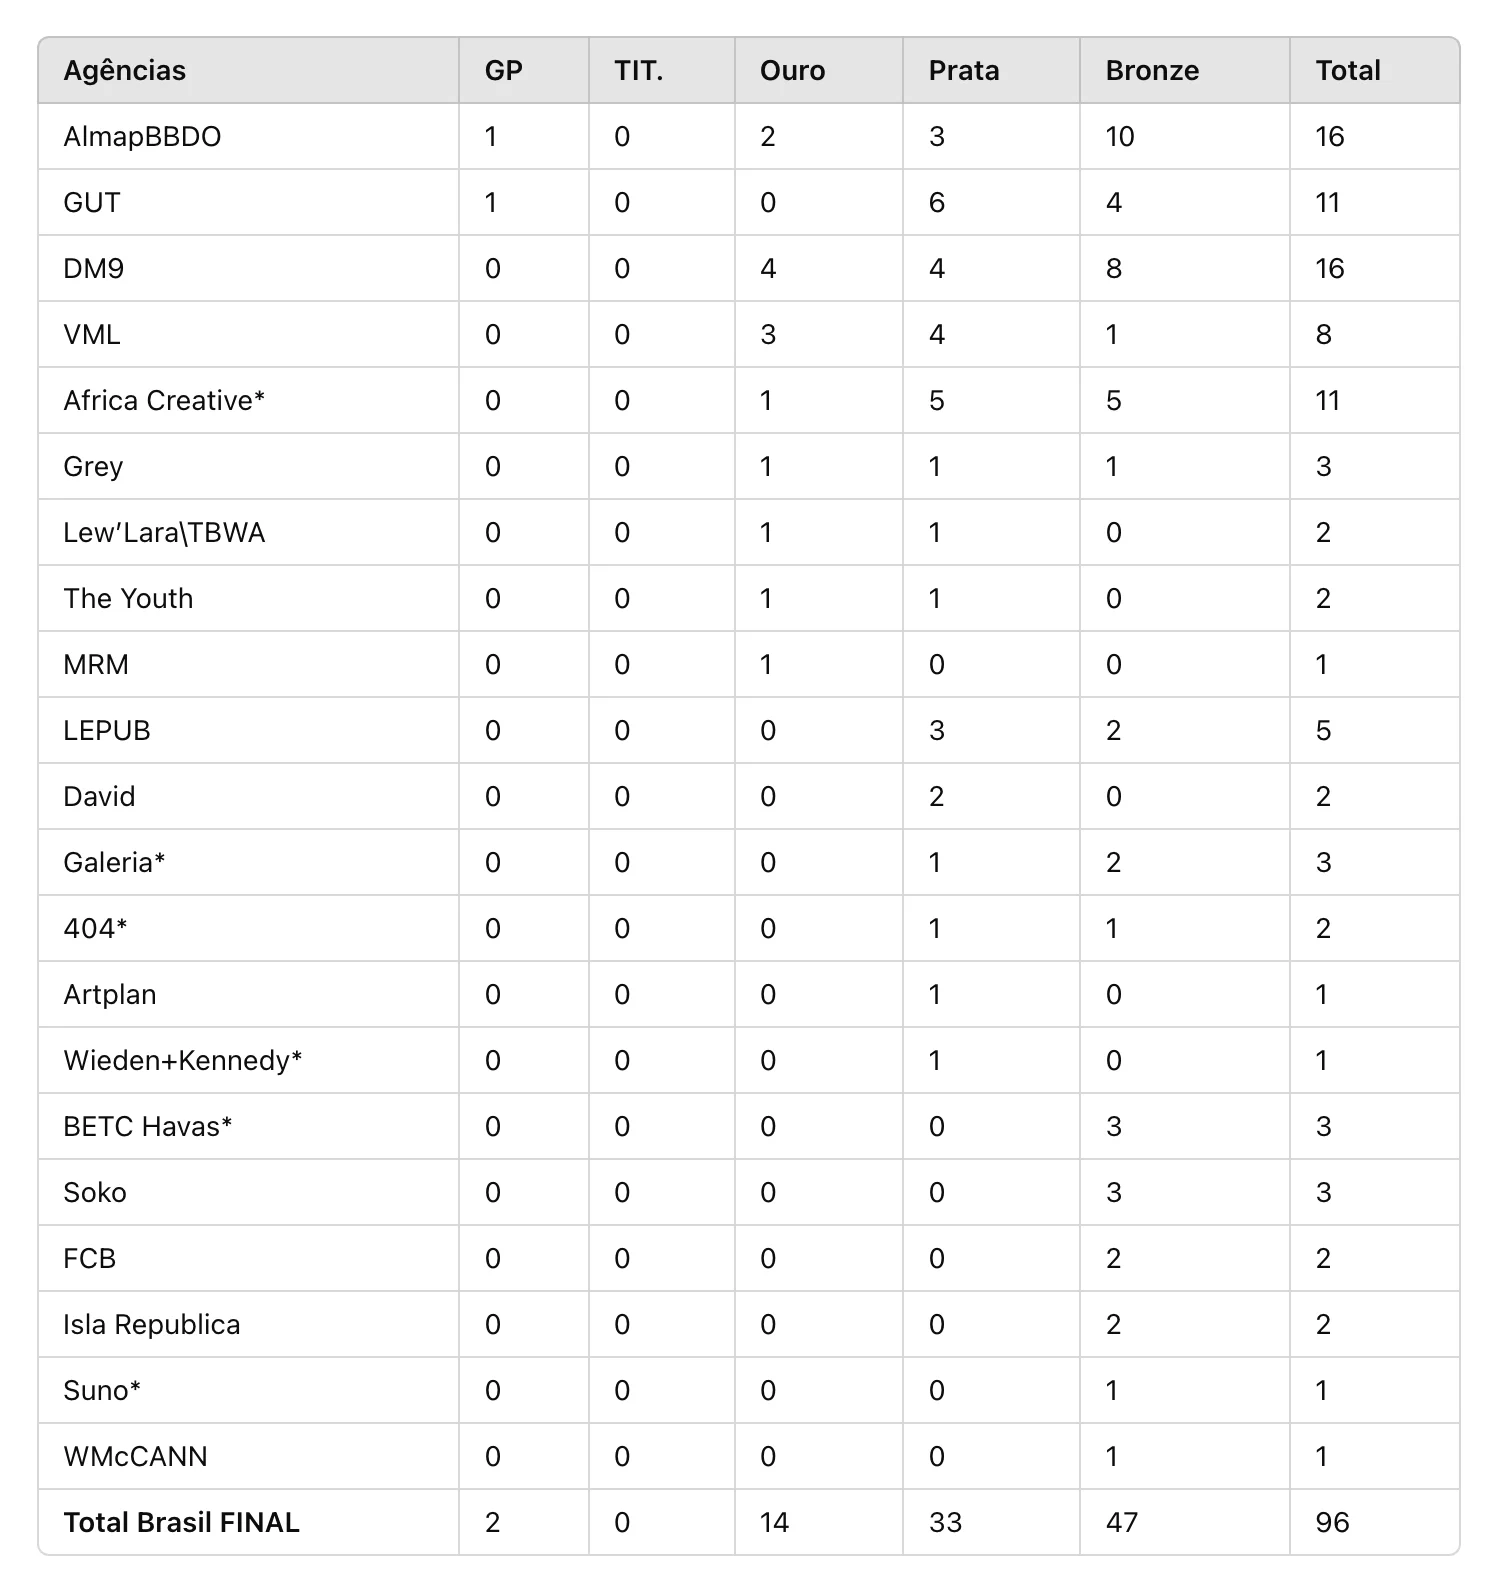 Table showing the performance of various advertising agencies in Brazil, listing their awards in categories such as Gold, Silver, and Bronze, with totals. AlmapBBDO and DM9 lead with 16 awards each.